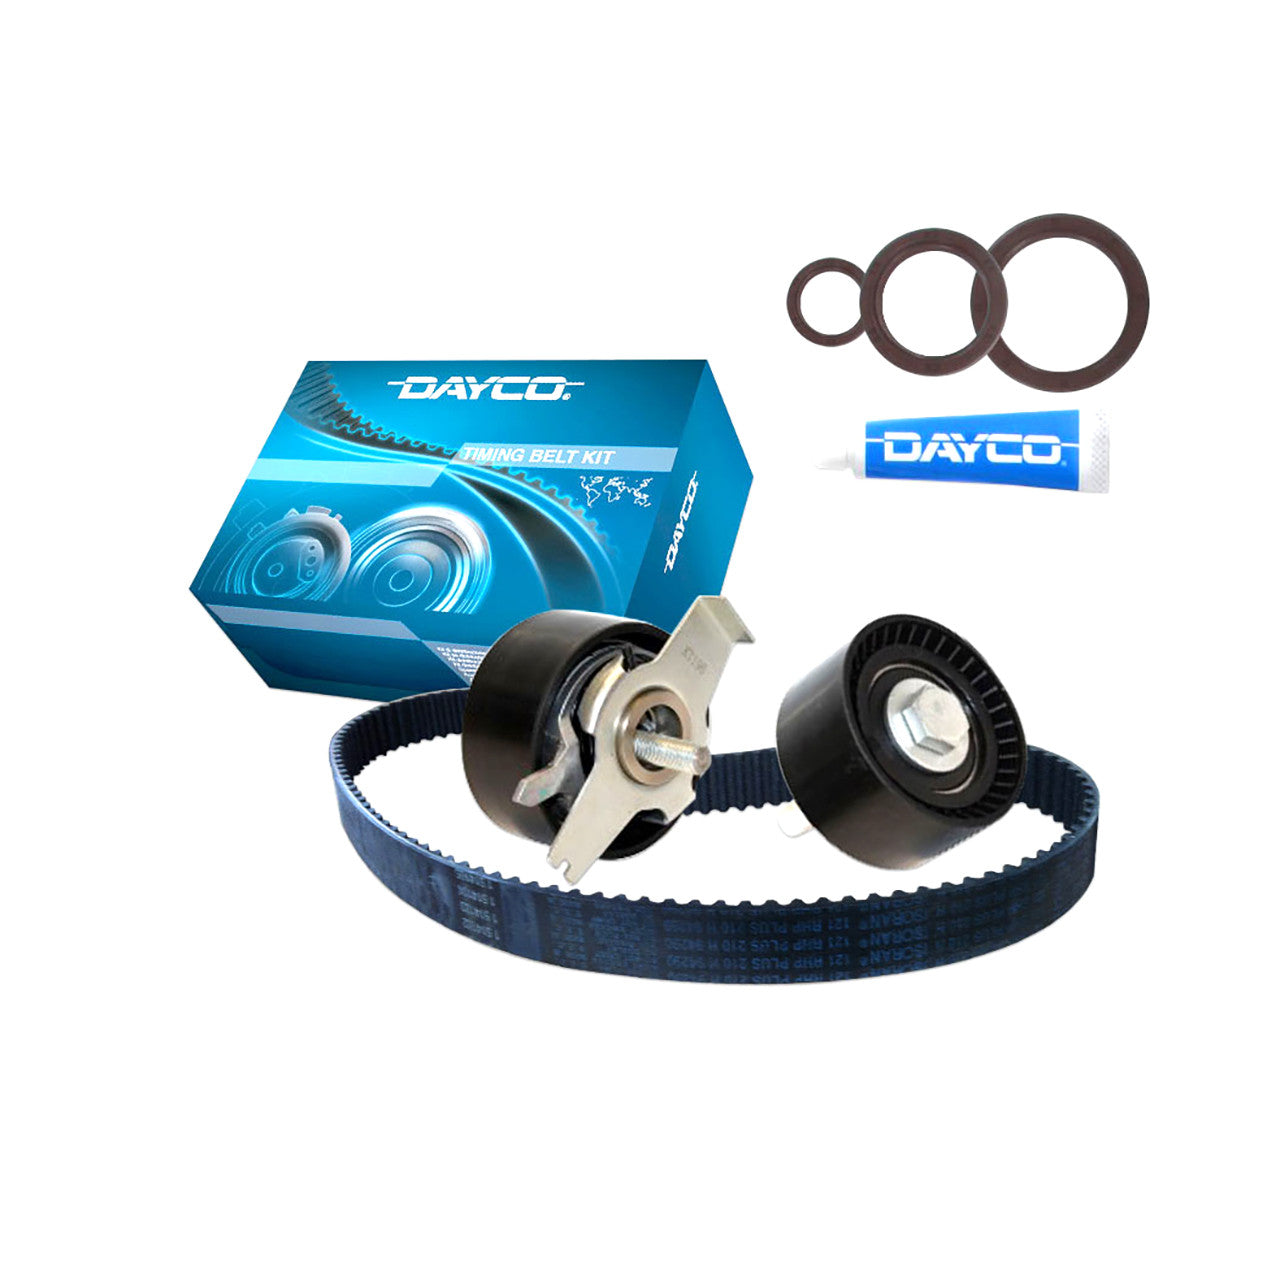 KTBA289 Dayco Timing Belt Kit for Great Wall V200 X200 2.0 L 4Cyl (Aug2011 on)